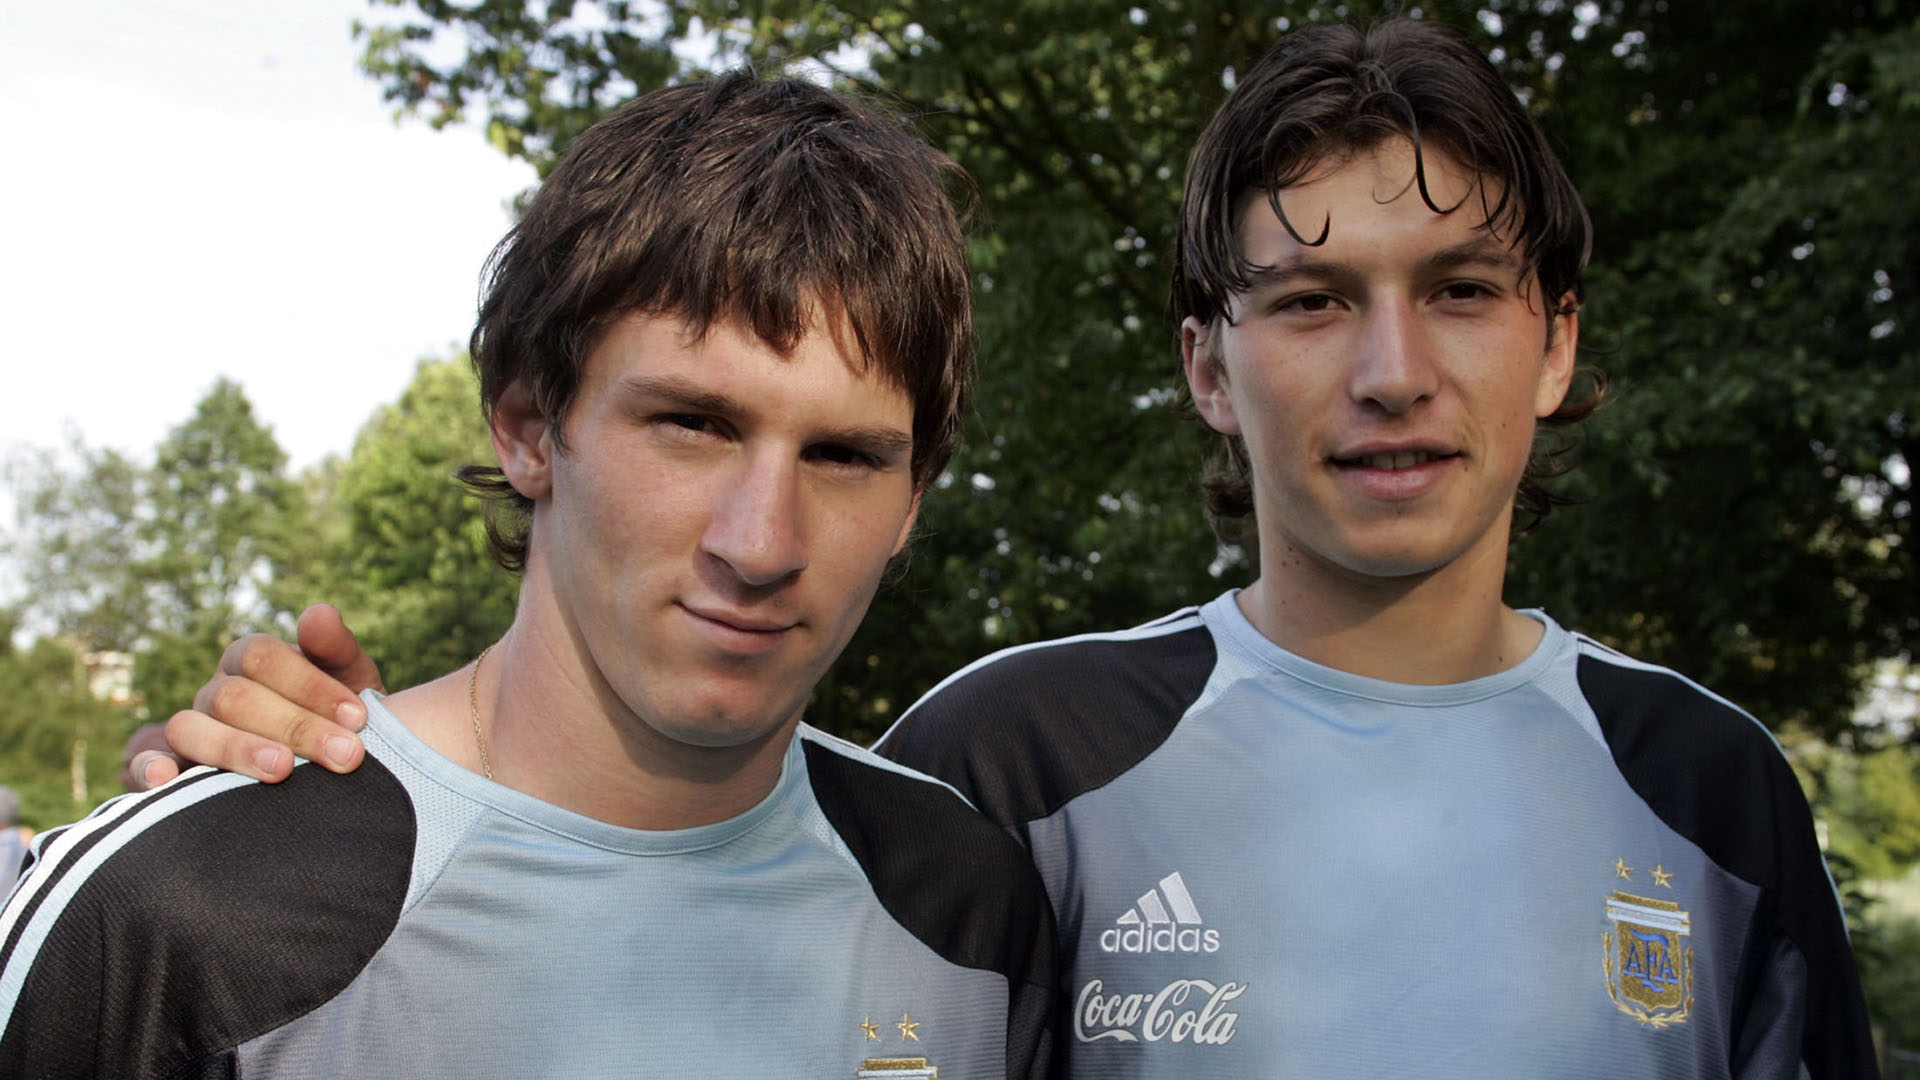  Argentina's Lionel Messi and Gustavo Oberman (R) pose after a training session with their team at the F.C de Bilt stadium in Utrecht June 26, 2005. Argentina faces Brazil on June 28 for the semi-finals of the World Youth Championship. REUTERS/Enrique Marcarian  EM/KS